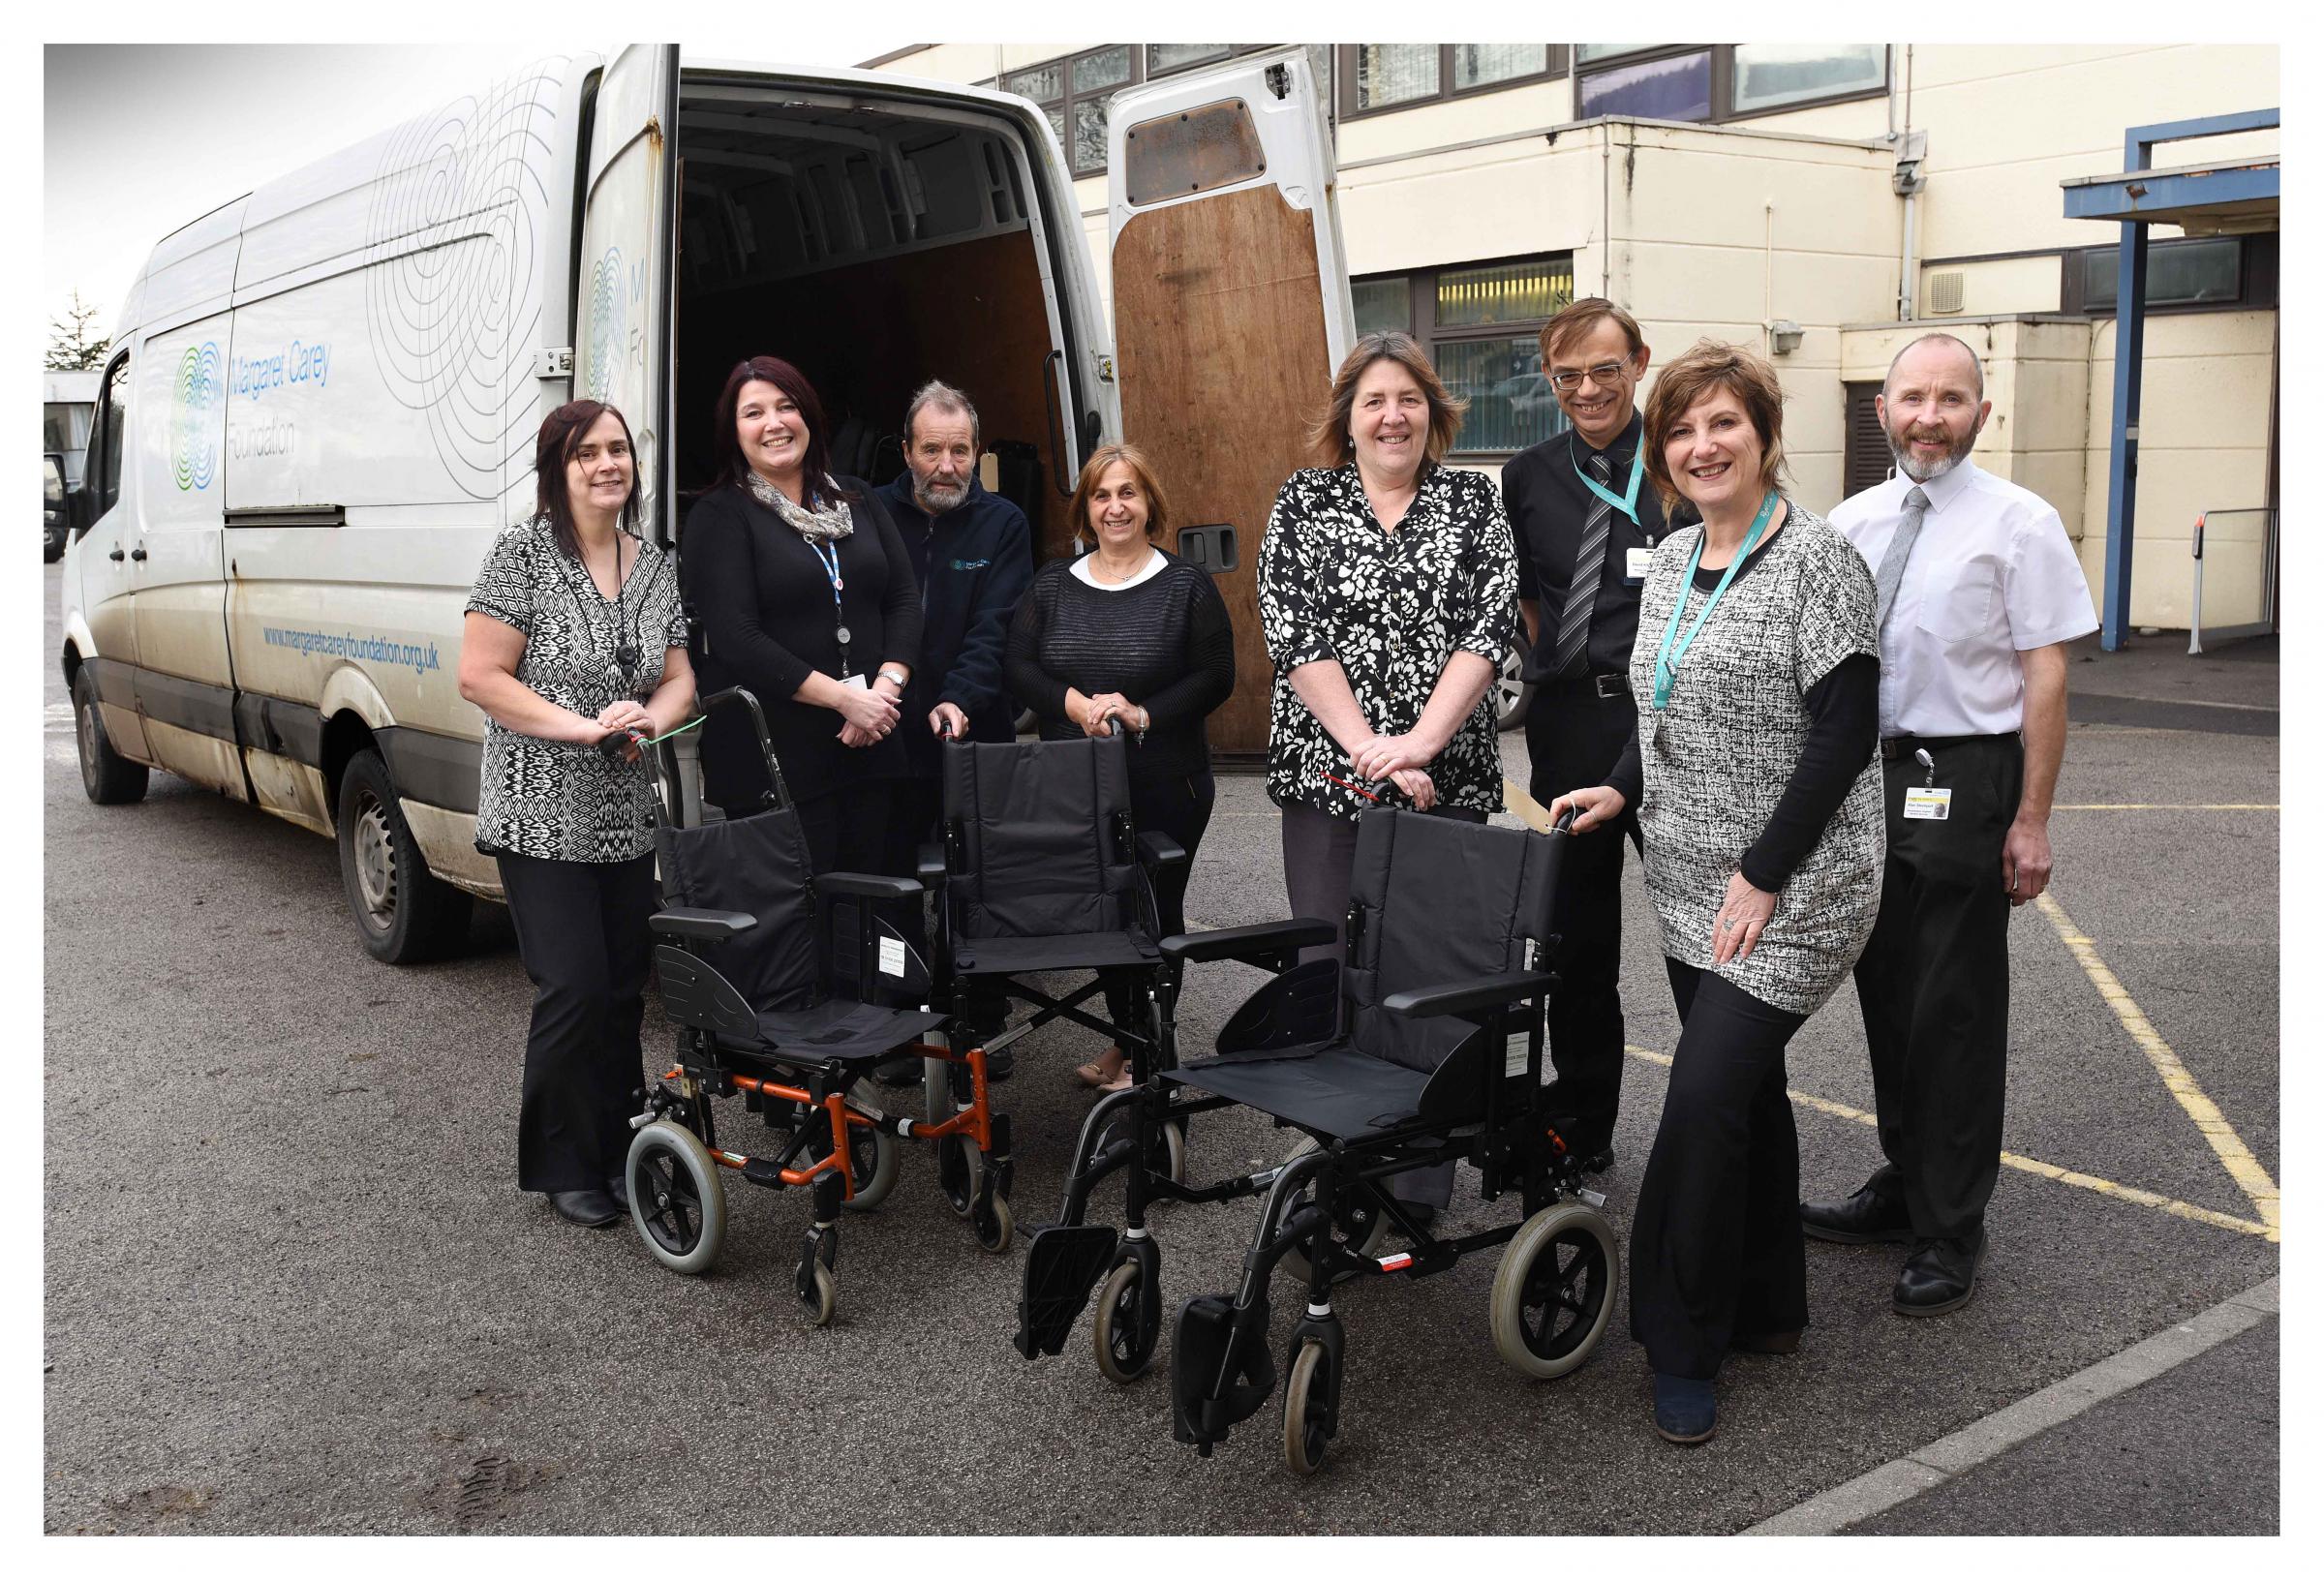 Old hospital wheelchairs get new lease of life overseas - Bradford Telegraph and Argus